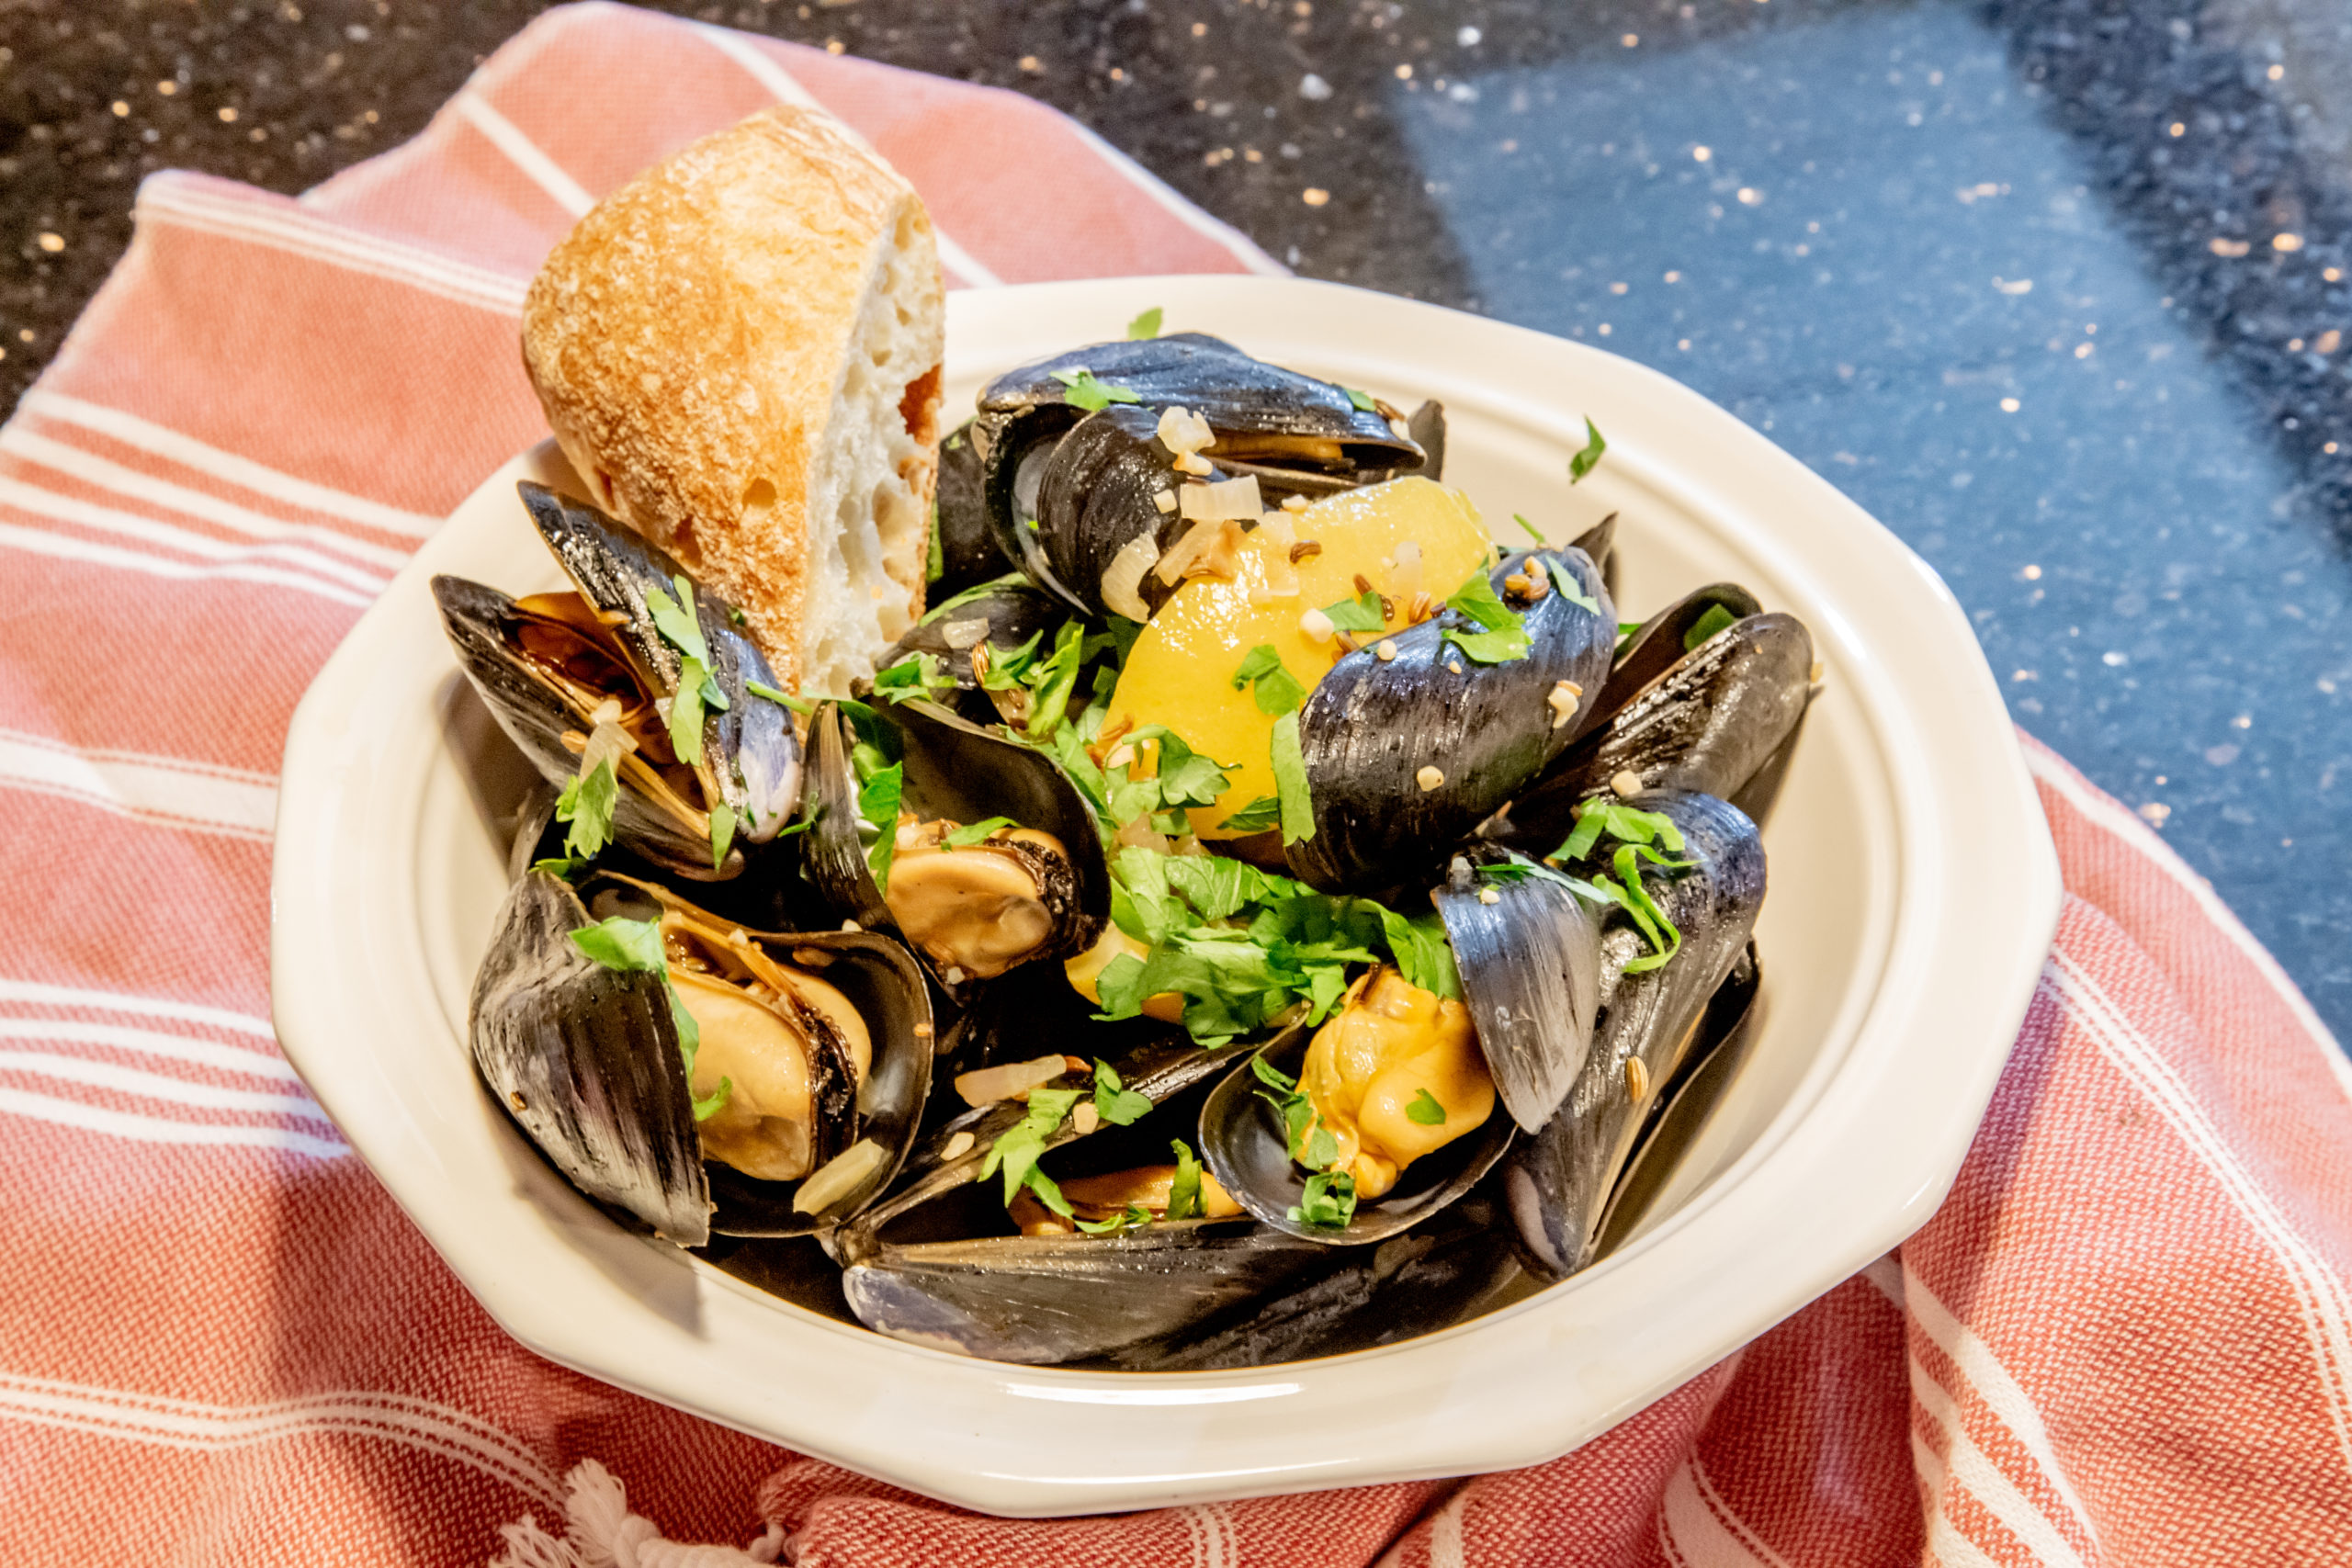 Mussels with french bread.